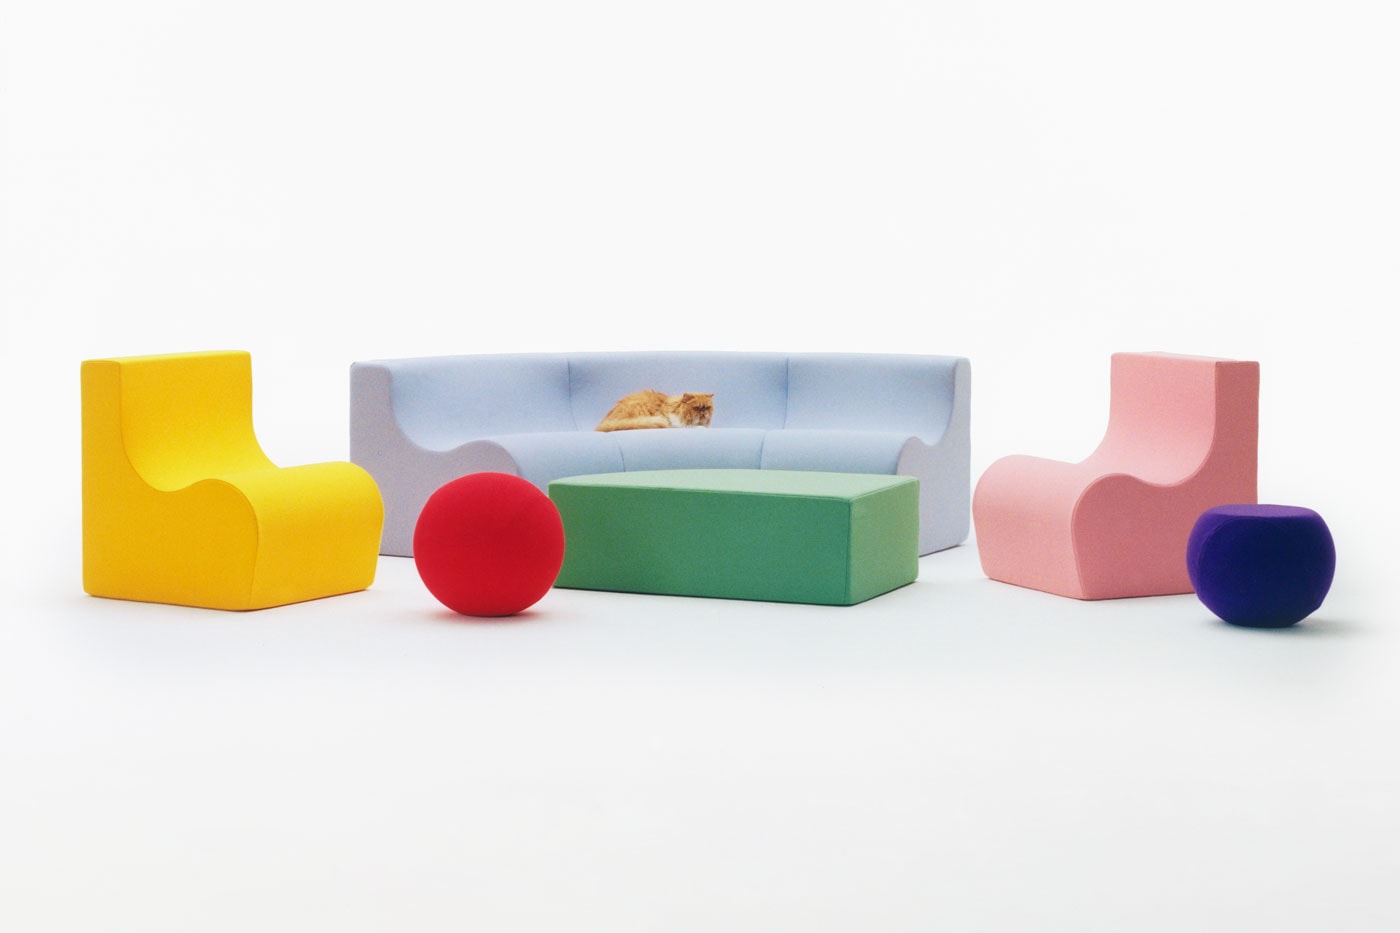 NARA's First Collection Arrives in a Colorful Spectrum of Modular Elements 